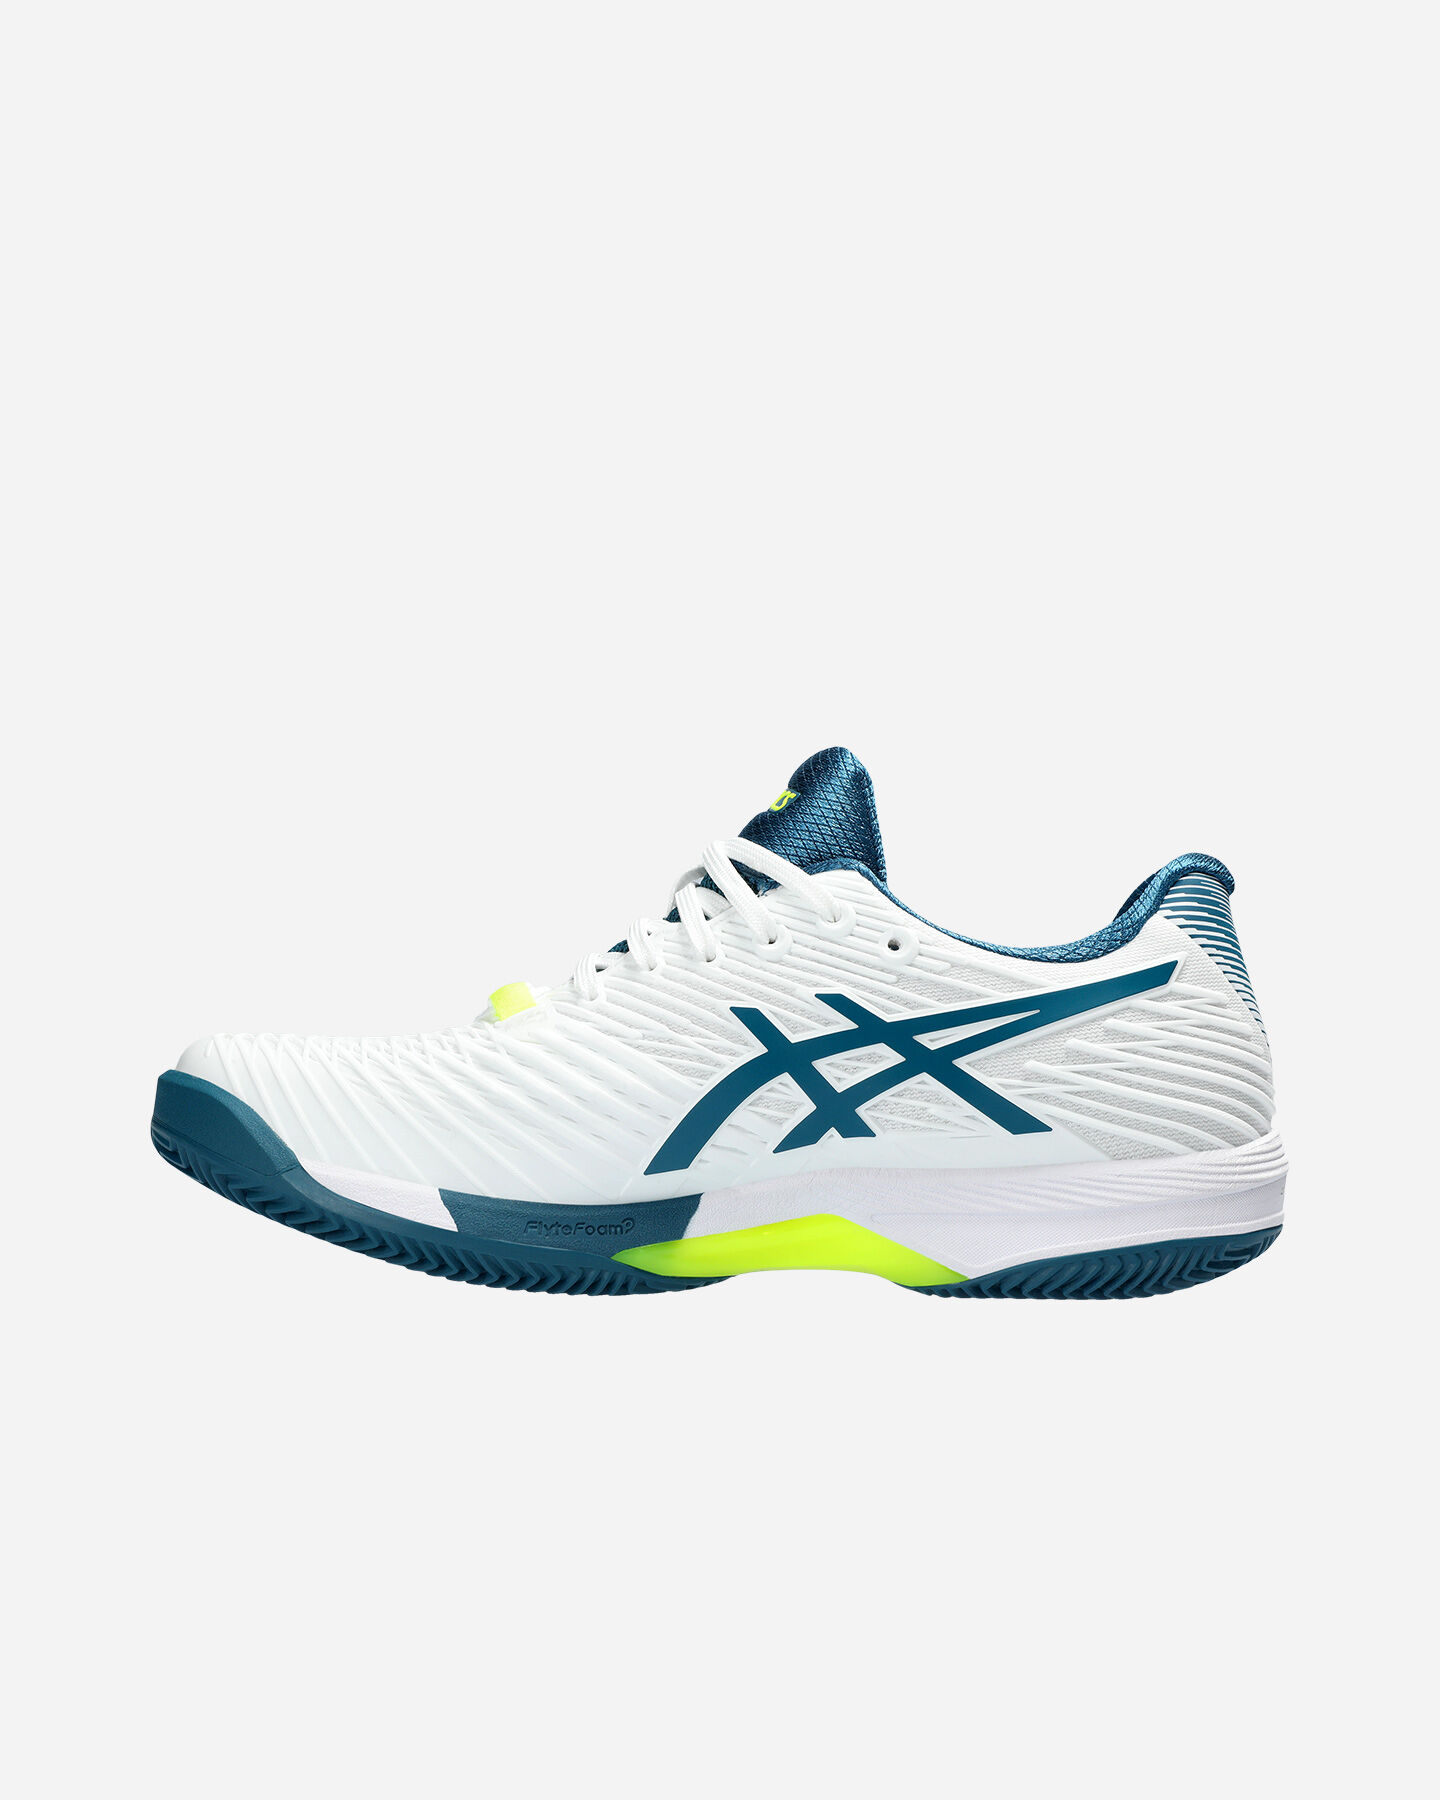  Scarpe tennis ASICS SOLUTION SPEED FF 2 CLAY M S5585286|102|8 scatto 5